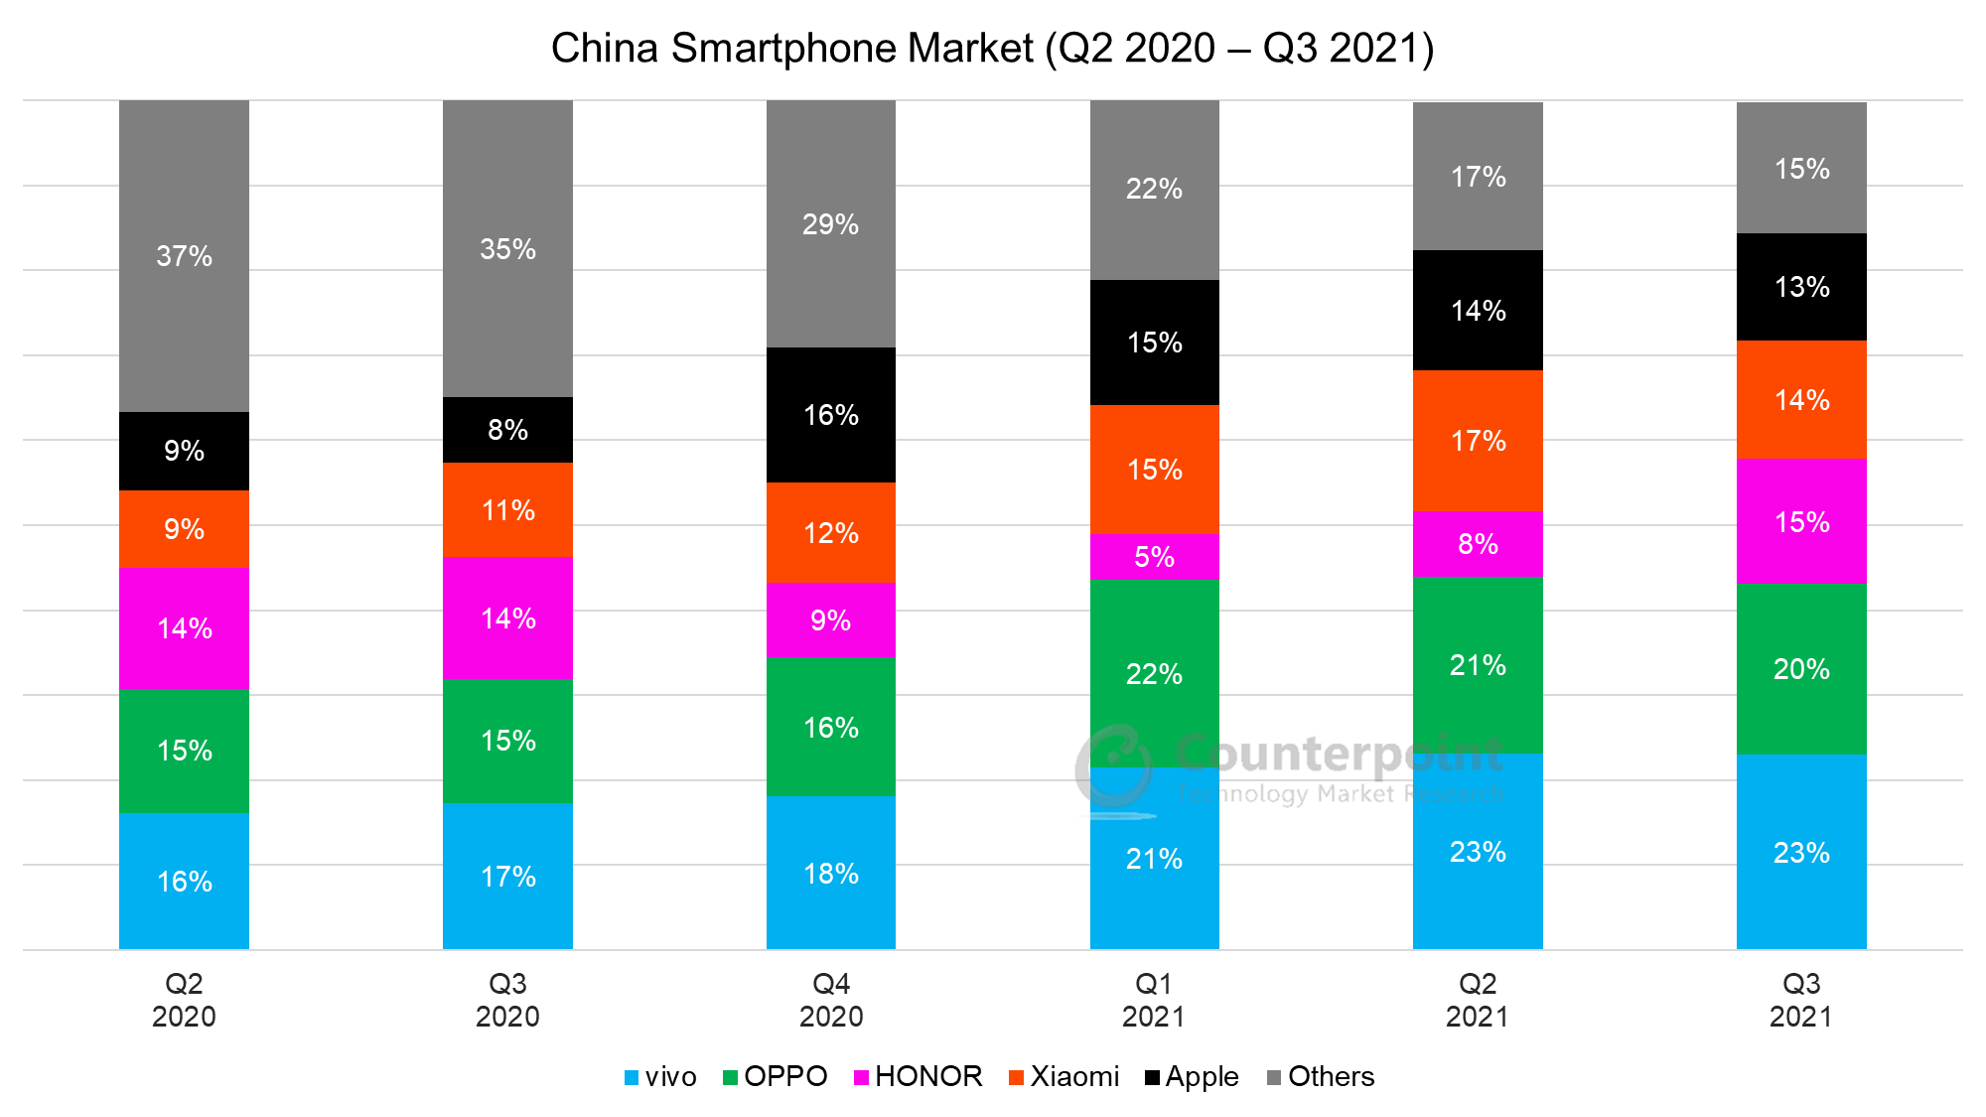 Counterpoint Research China Smartphone Market Q3 2021